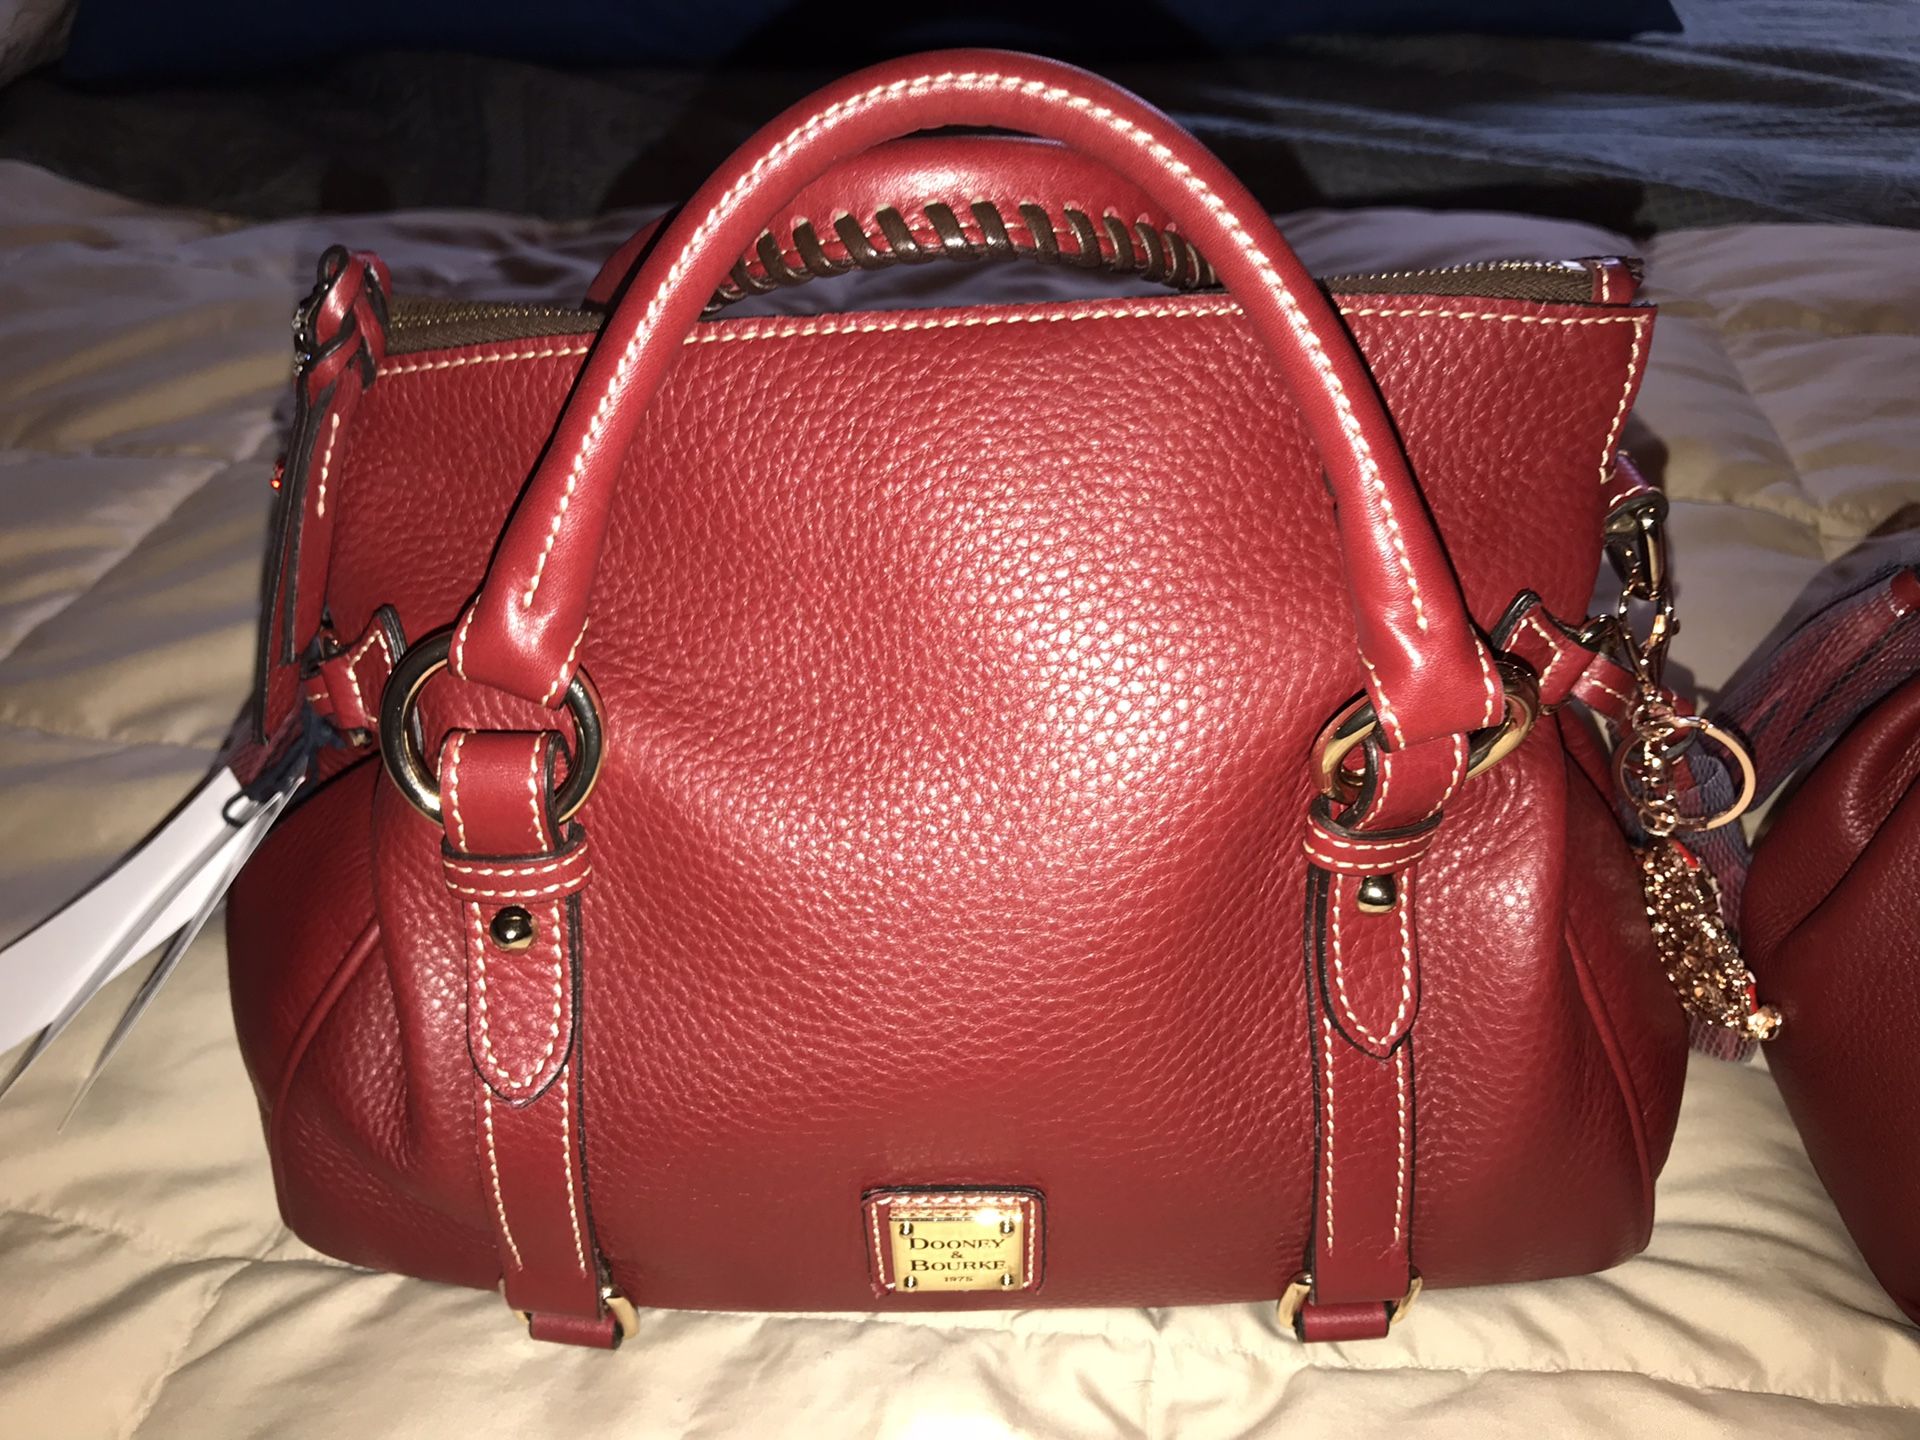 NWT Dooney and Bourke